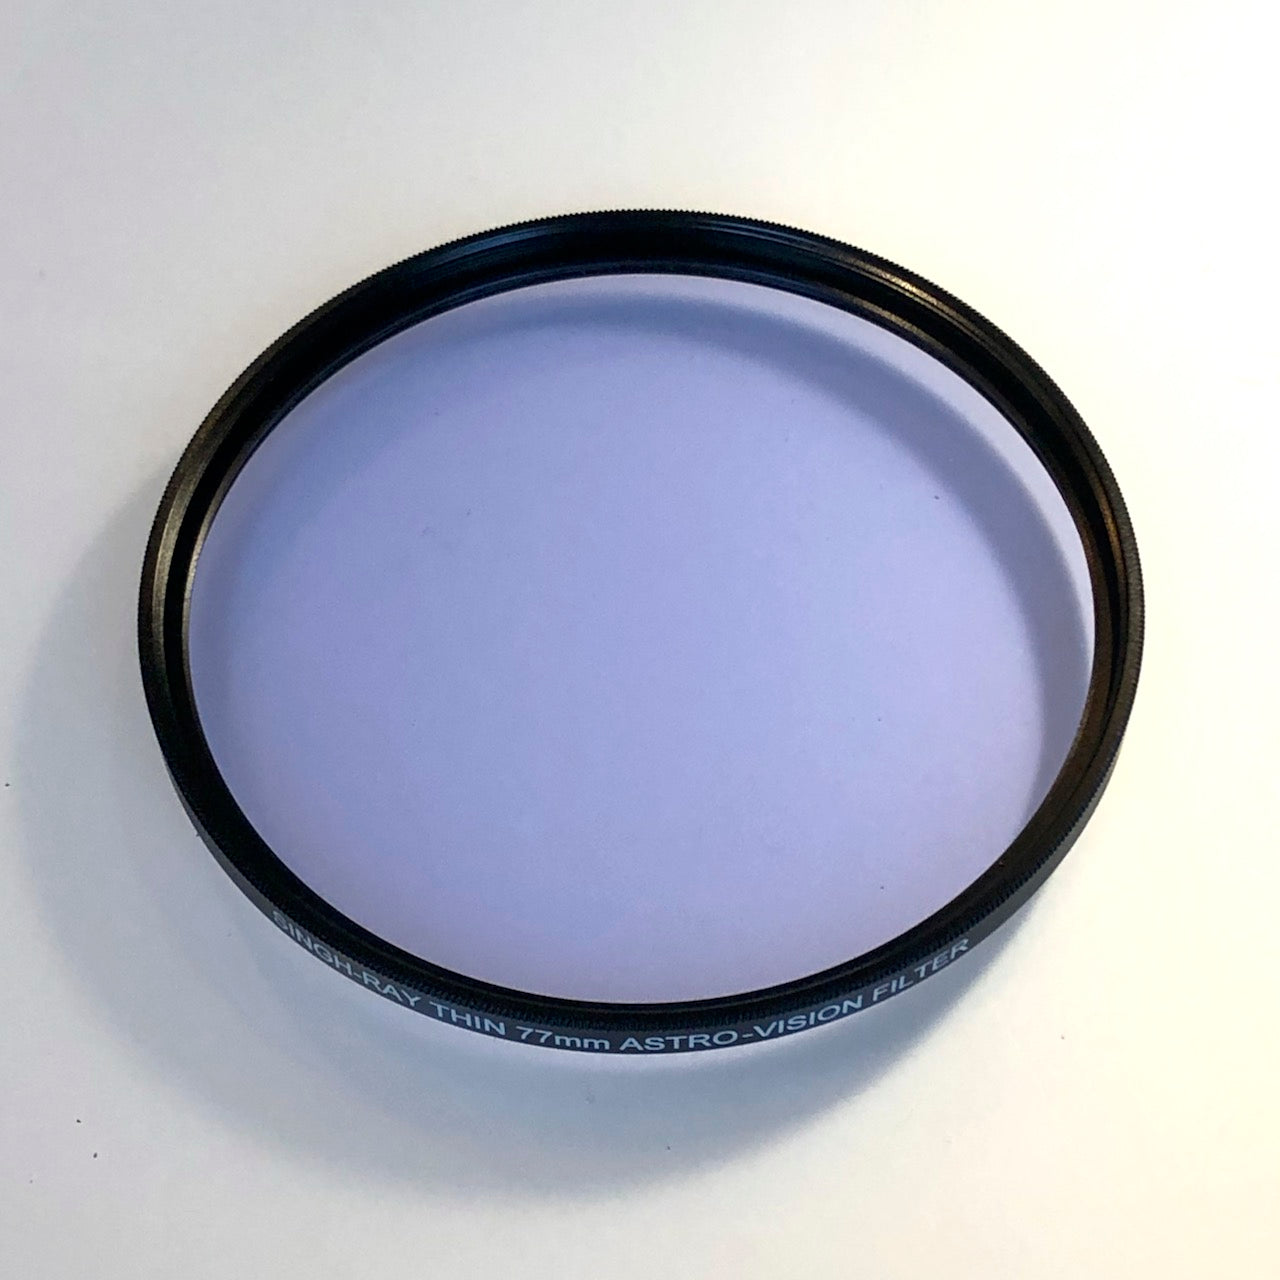 Singh Ray Thin Astro-Vision filter (77mm)